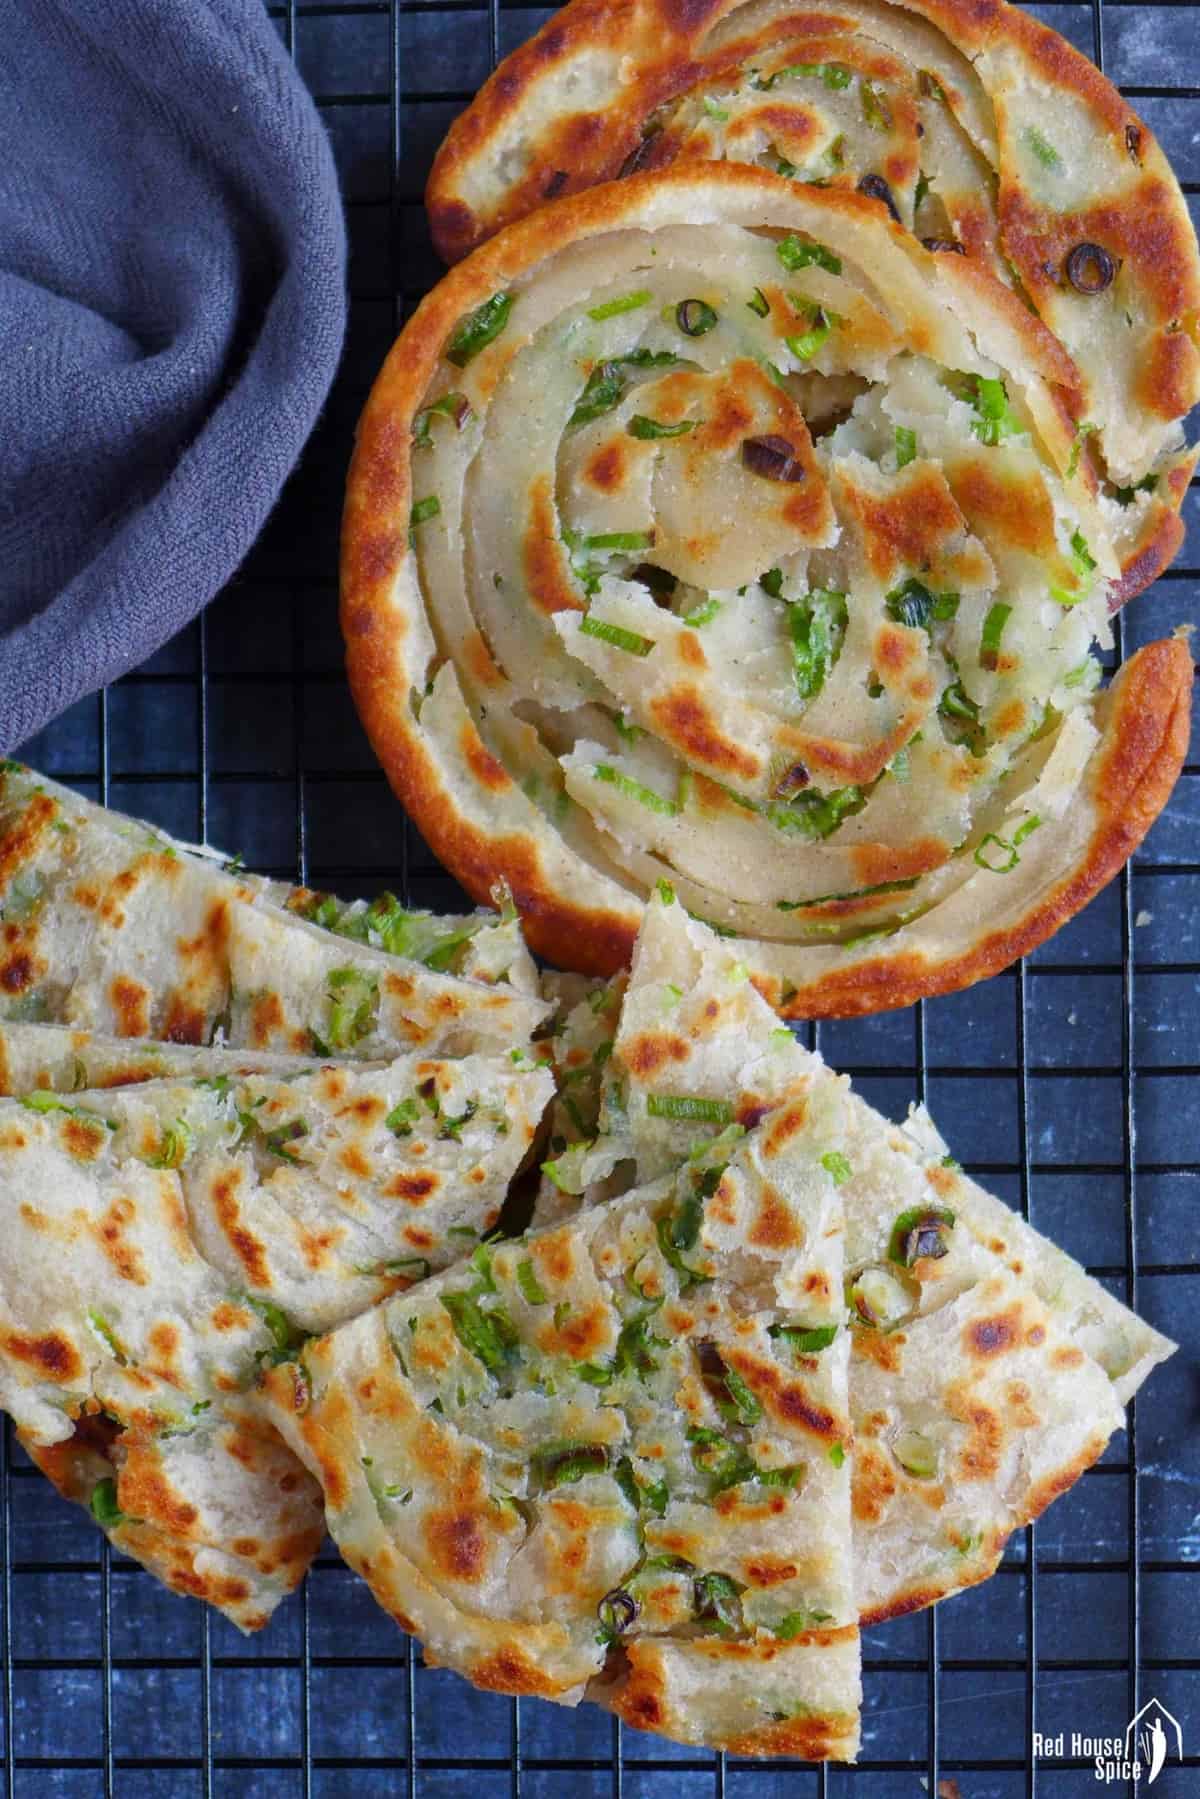 scallion pancakes torn and cut